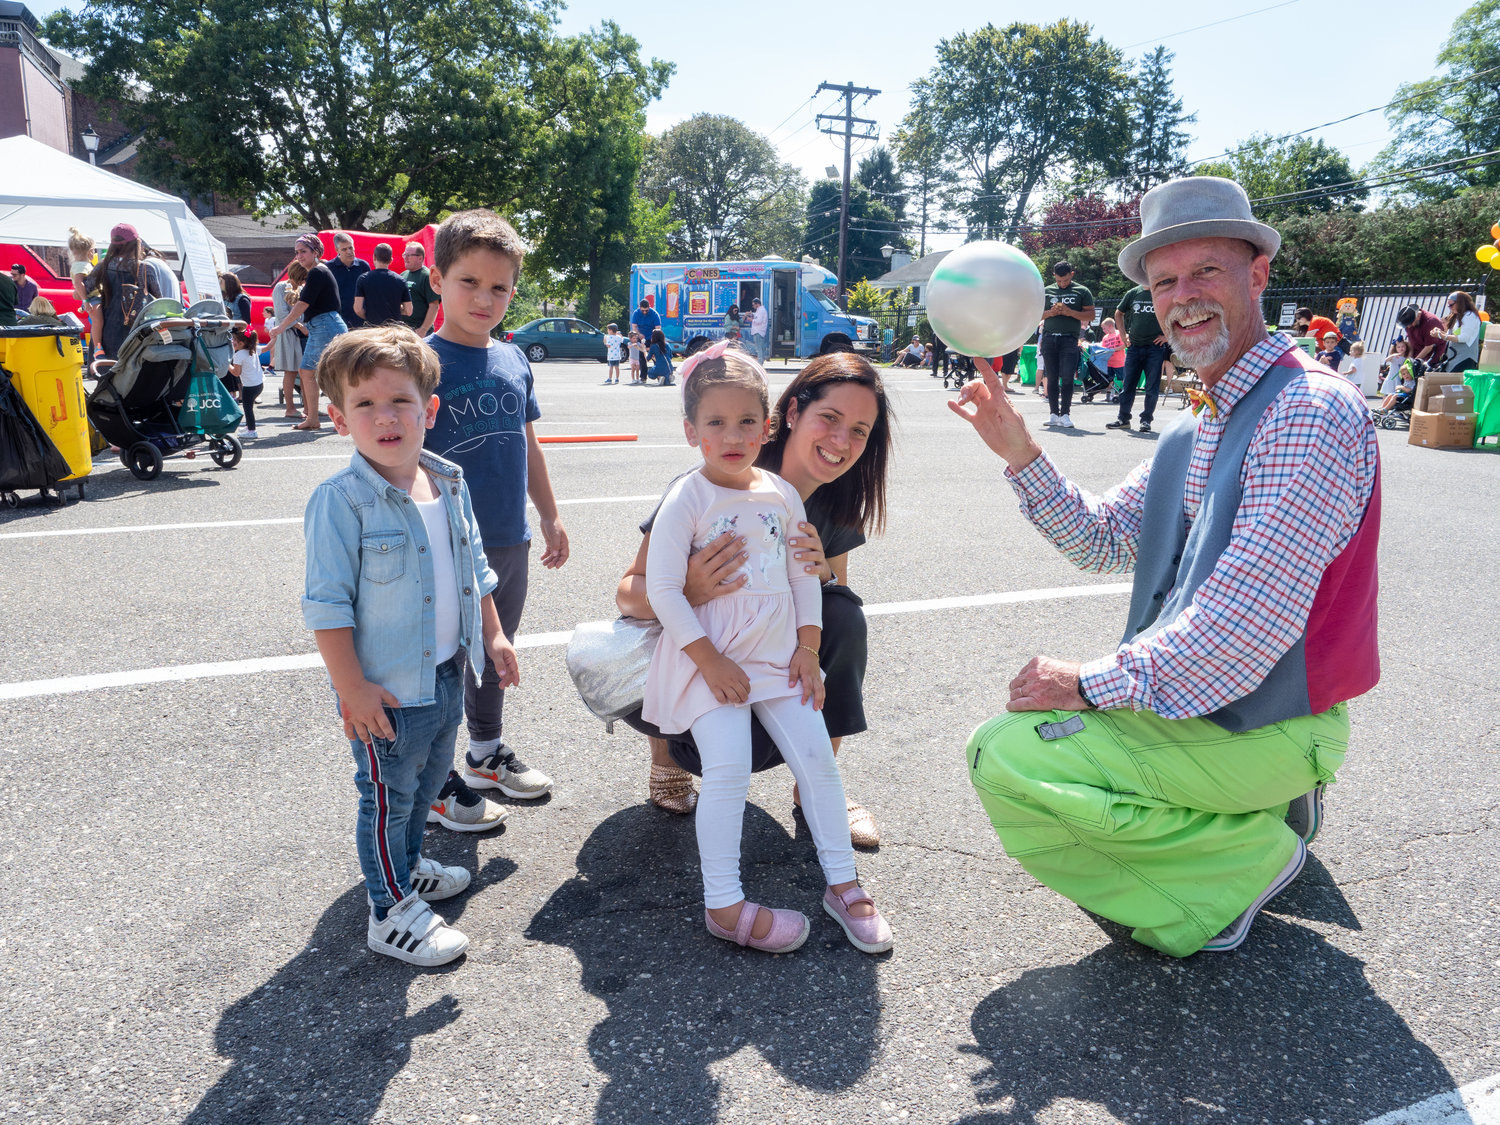 Performer Fred Collins, far right, entertained the Tawil family from left Jake, 2, Sam, 5, Linda, 4, and mother Karen at the JCC’s inaugural fall festival on Sept. 15.